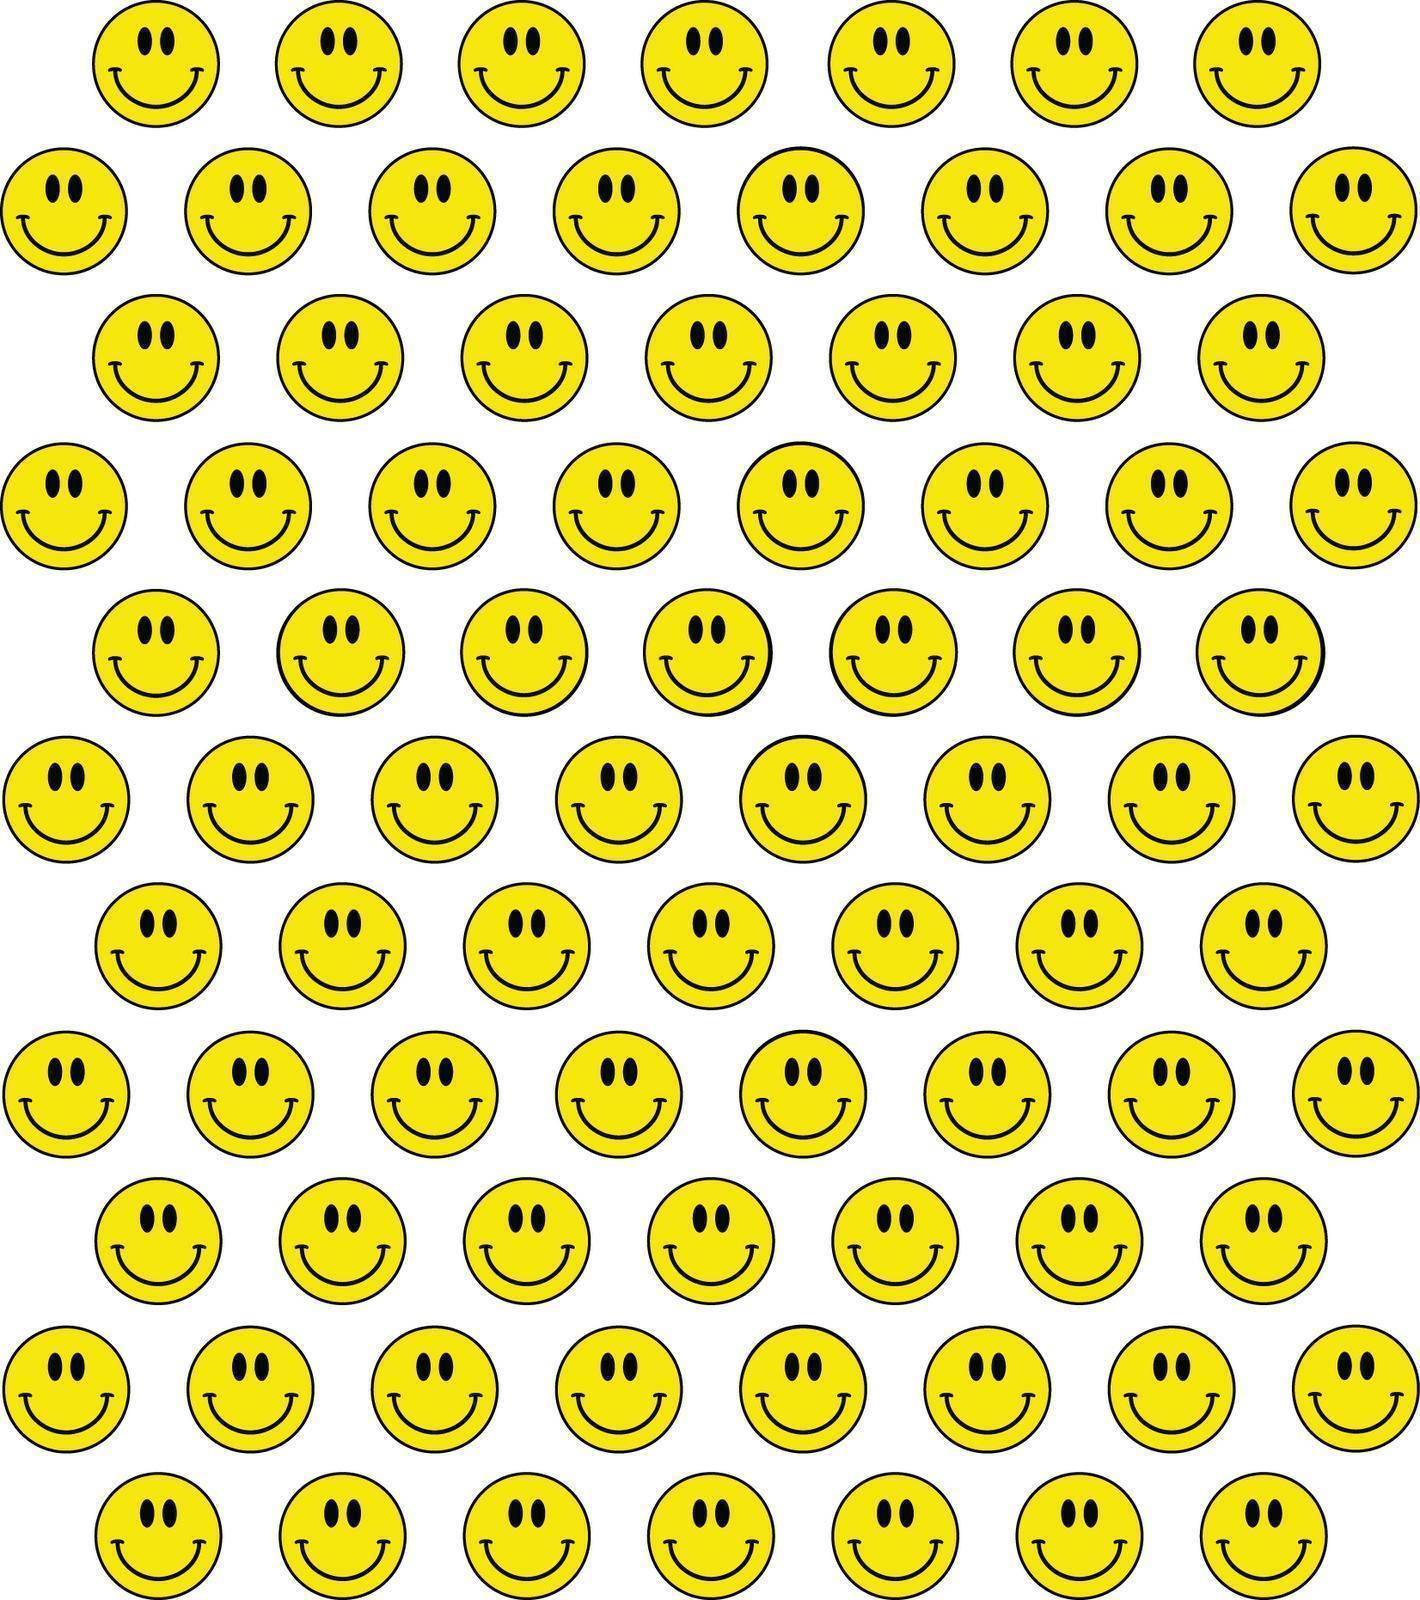 Smiley Face Classic Yellow Wallpaper